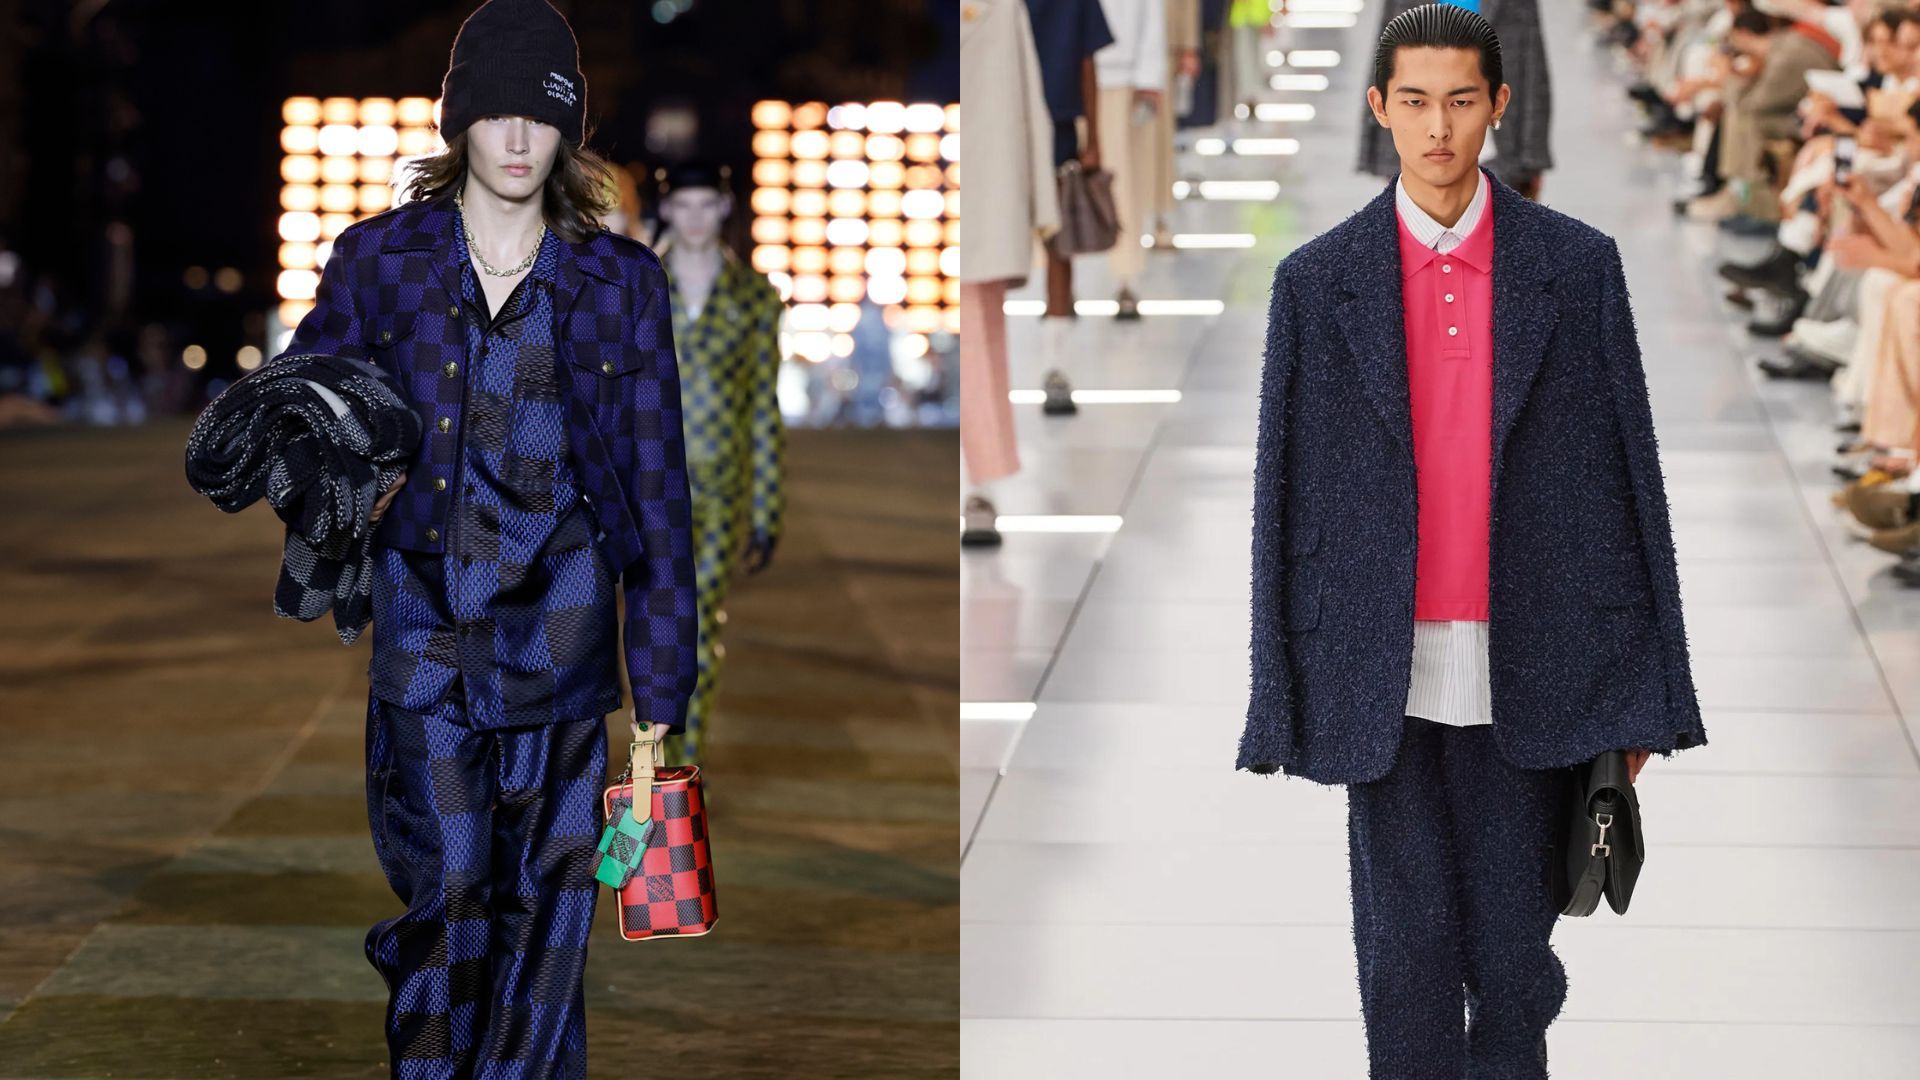 Paris Fashion Week: Best Moments from the Spring 2023 Menswear Collection